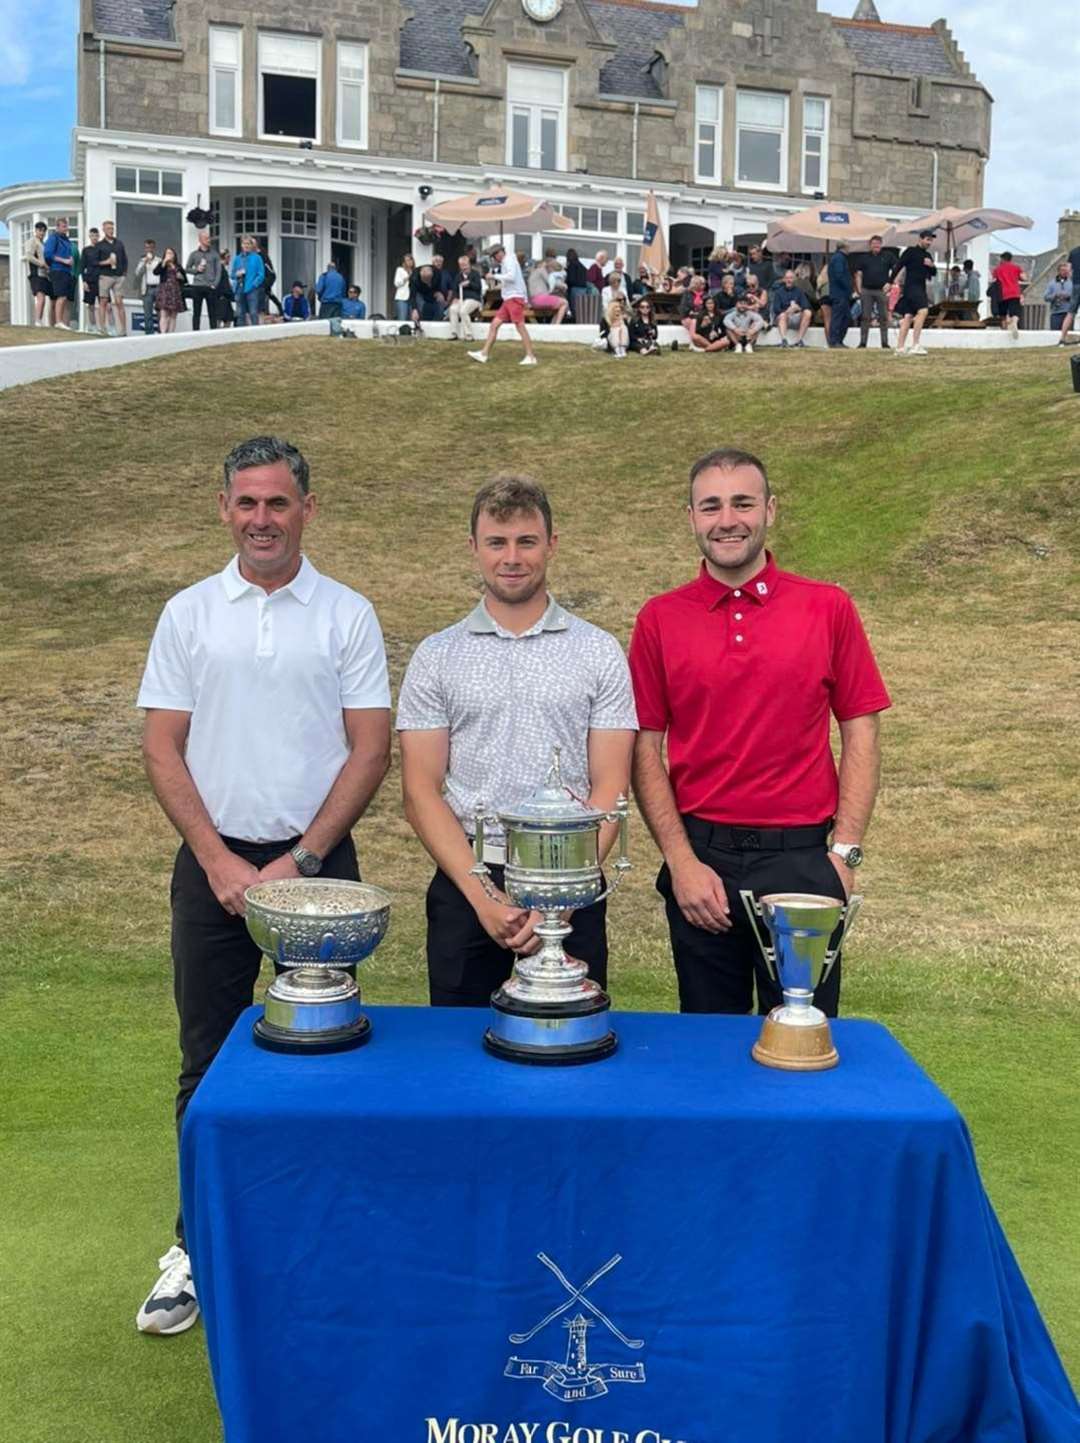 Moray 5-day Open winners, from left: Charlie Rowley, Matty Wilson and Kyle Edwards. Photo: Moray Golf Club Facebook